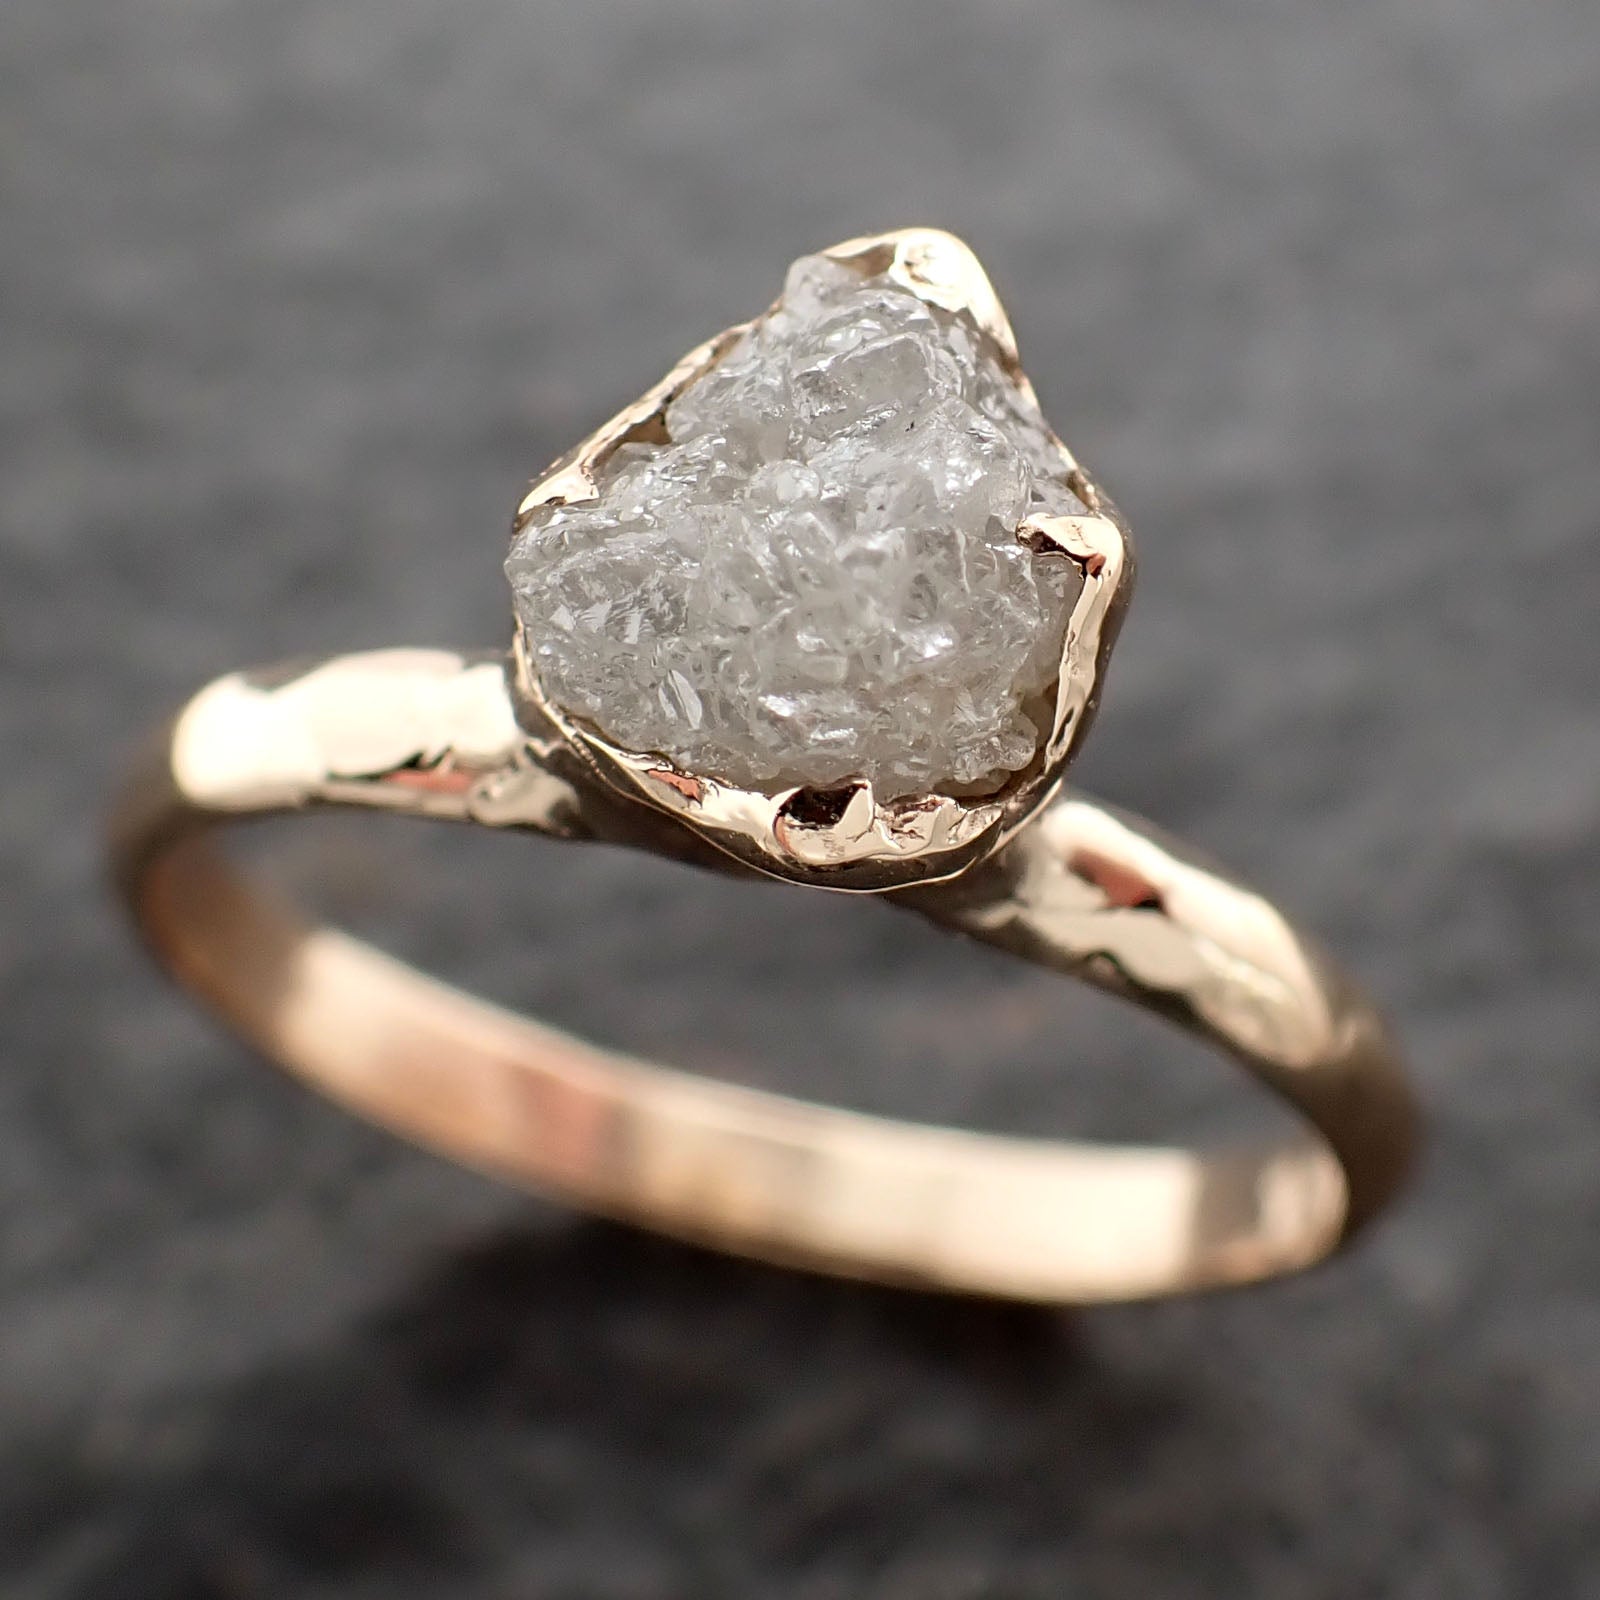 Raw Diamond Engagement Ring Rough Uncut Diamond Solitaire Recycled 14k yellow gold Conflict Free Diamond Wedding Promise 2697